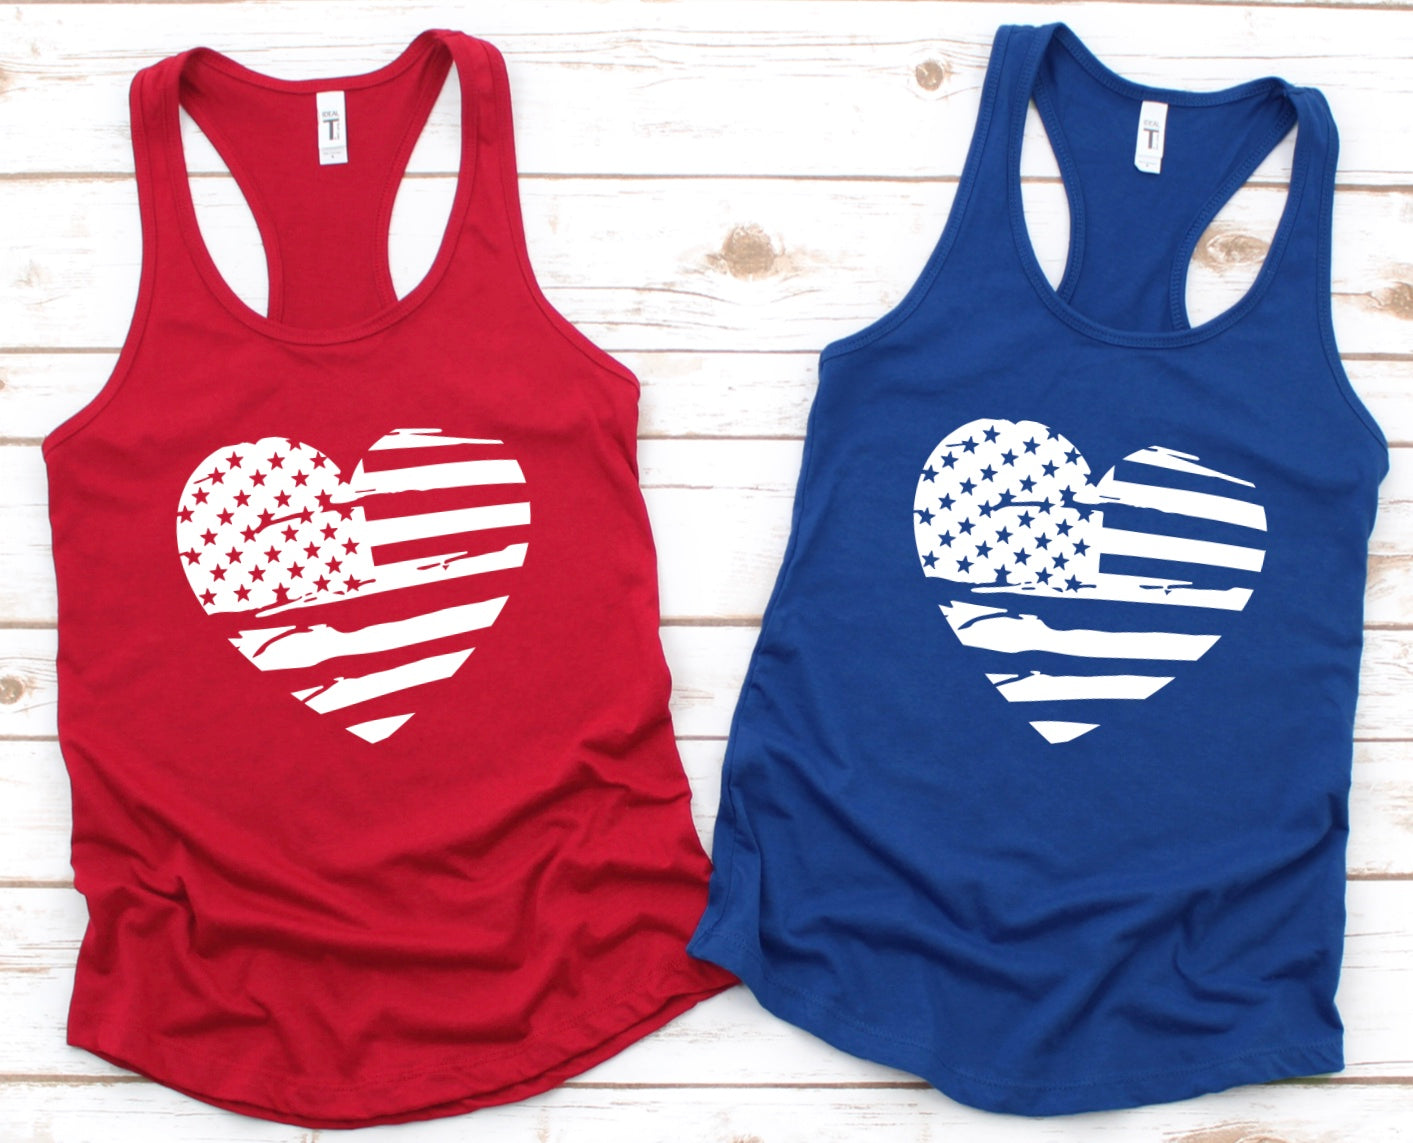 Distressed American flag graphic racerback tank tops 